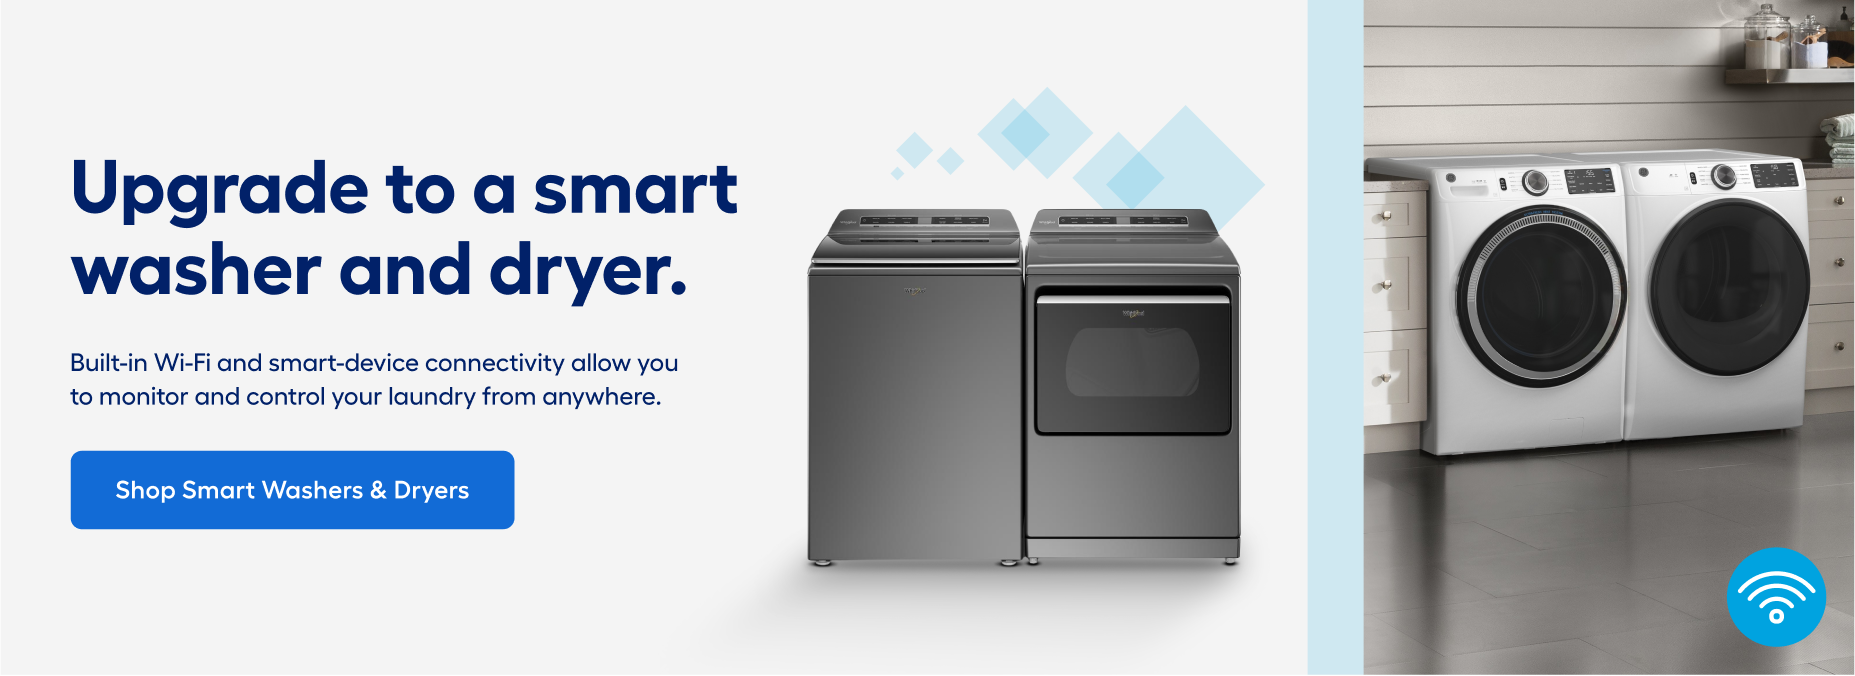 https://mobileimages.lowes.com/marketingimages/8be18391-9b87-4f9e-8914-8e9a57c61ee6/evergreen-smart-appliance-hero-banner-washer-dryer.png